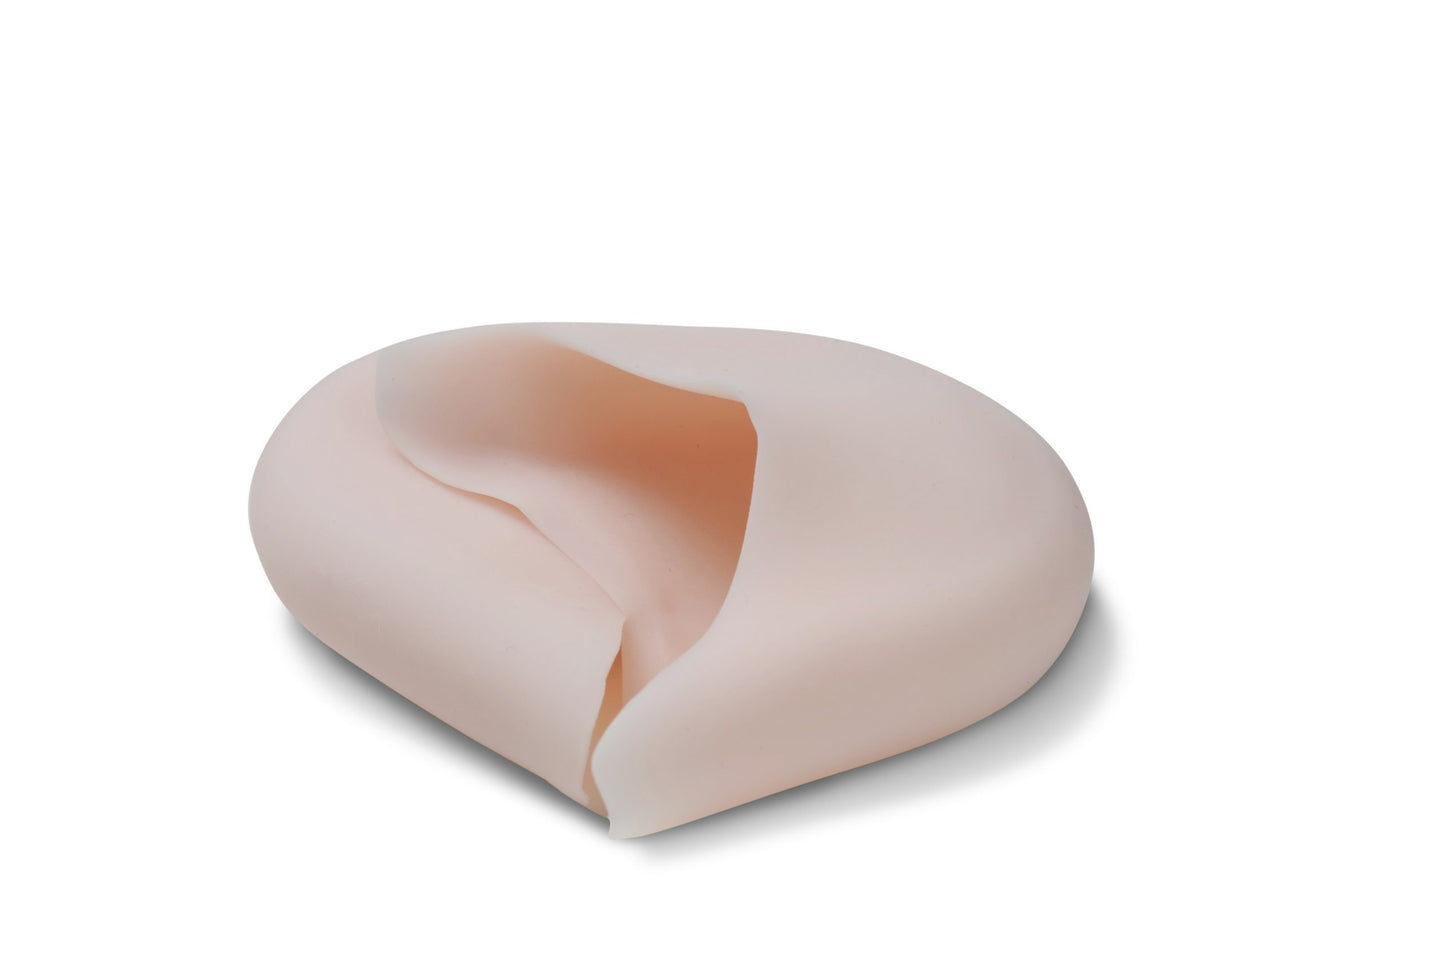 Merlet Silicone Toe Pads